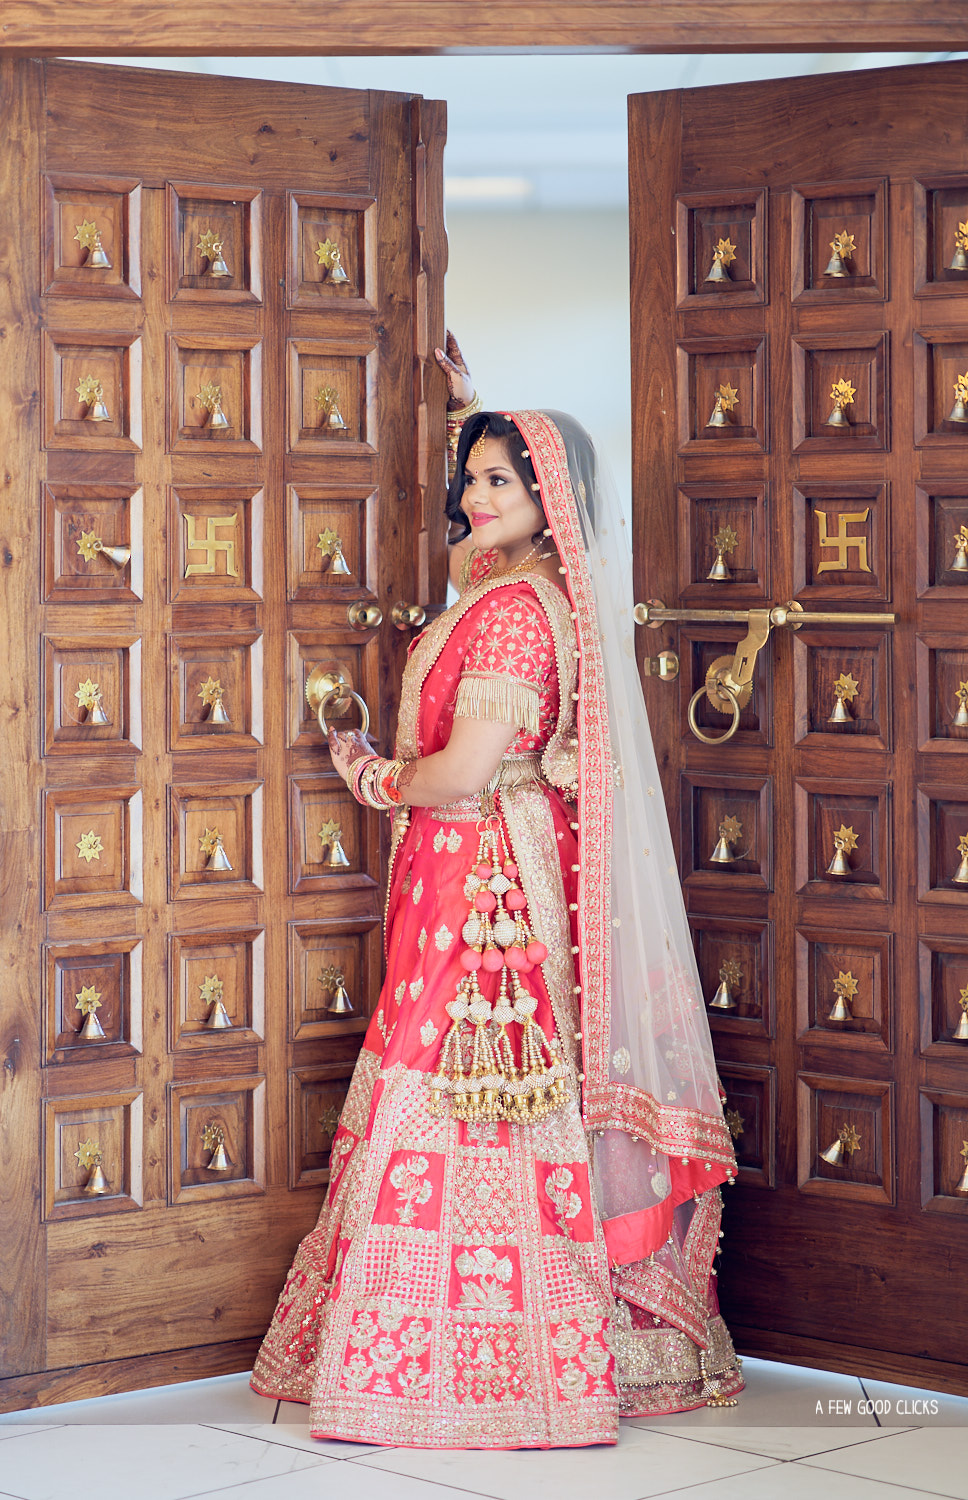 indian-bride-wedding-photography-at-sunnyvale-hindu-temple-ca